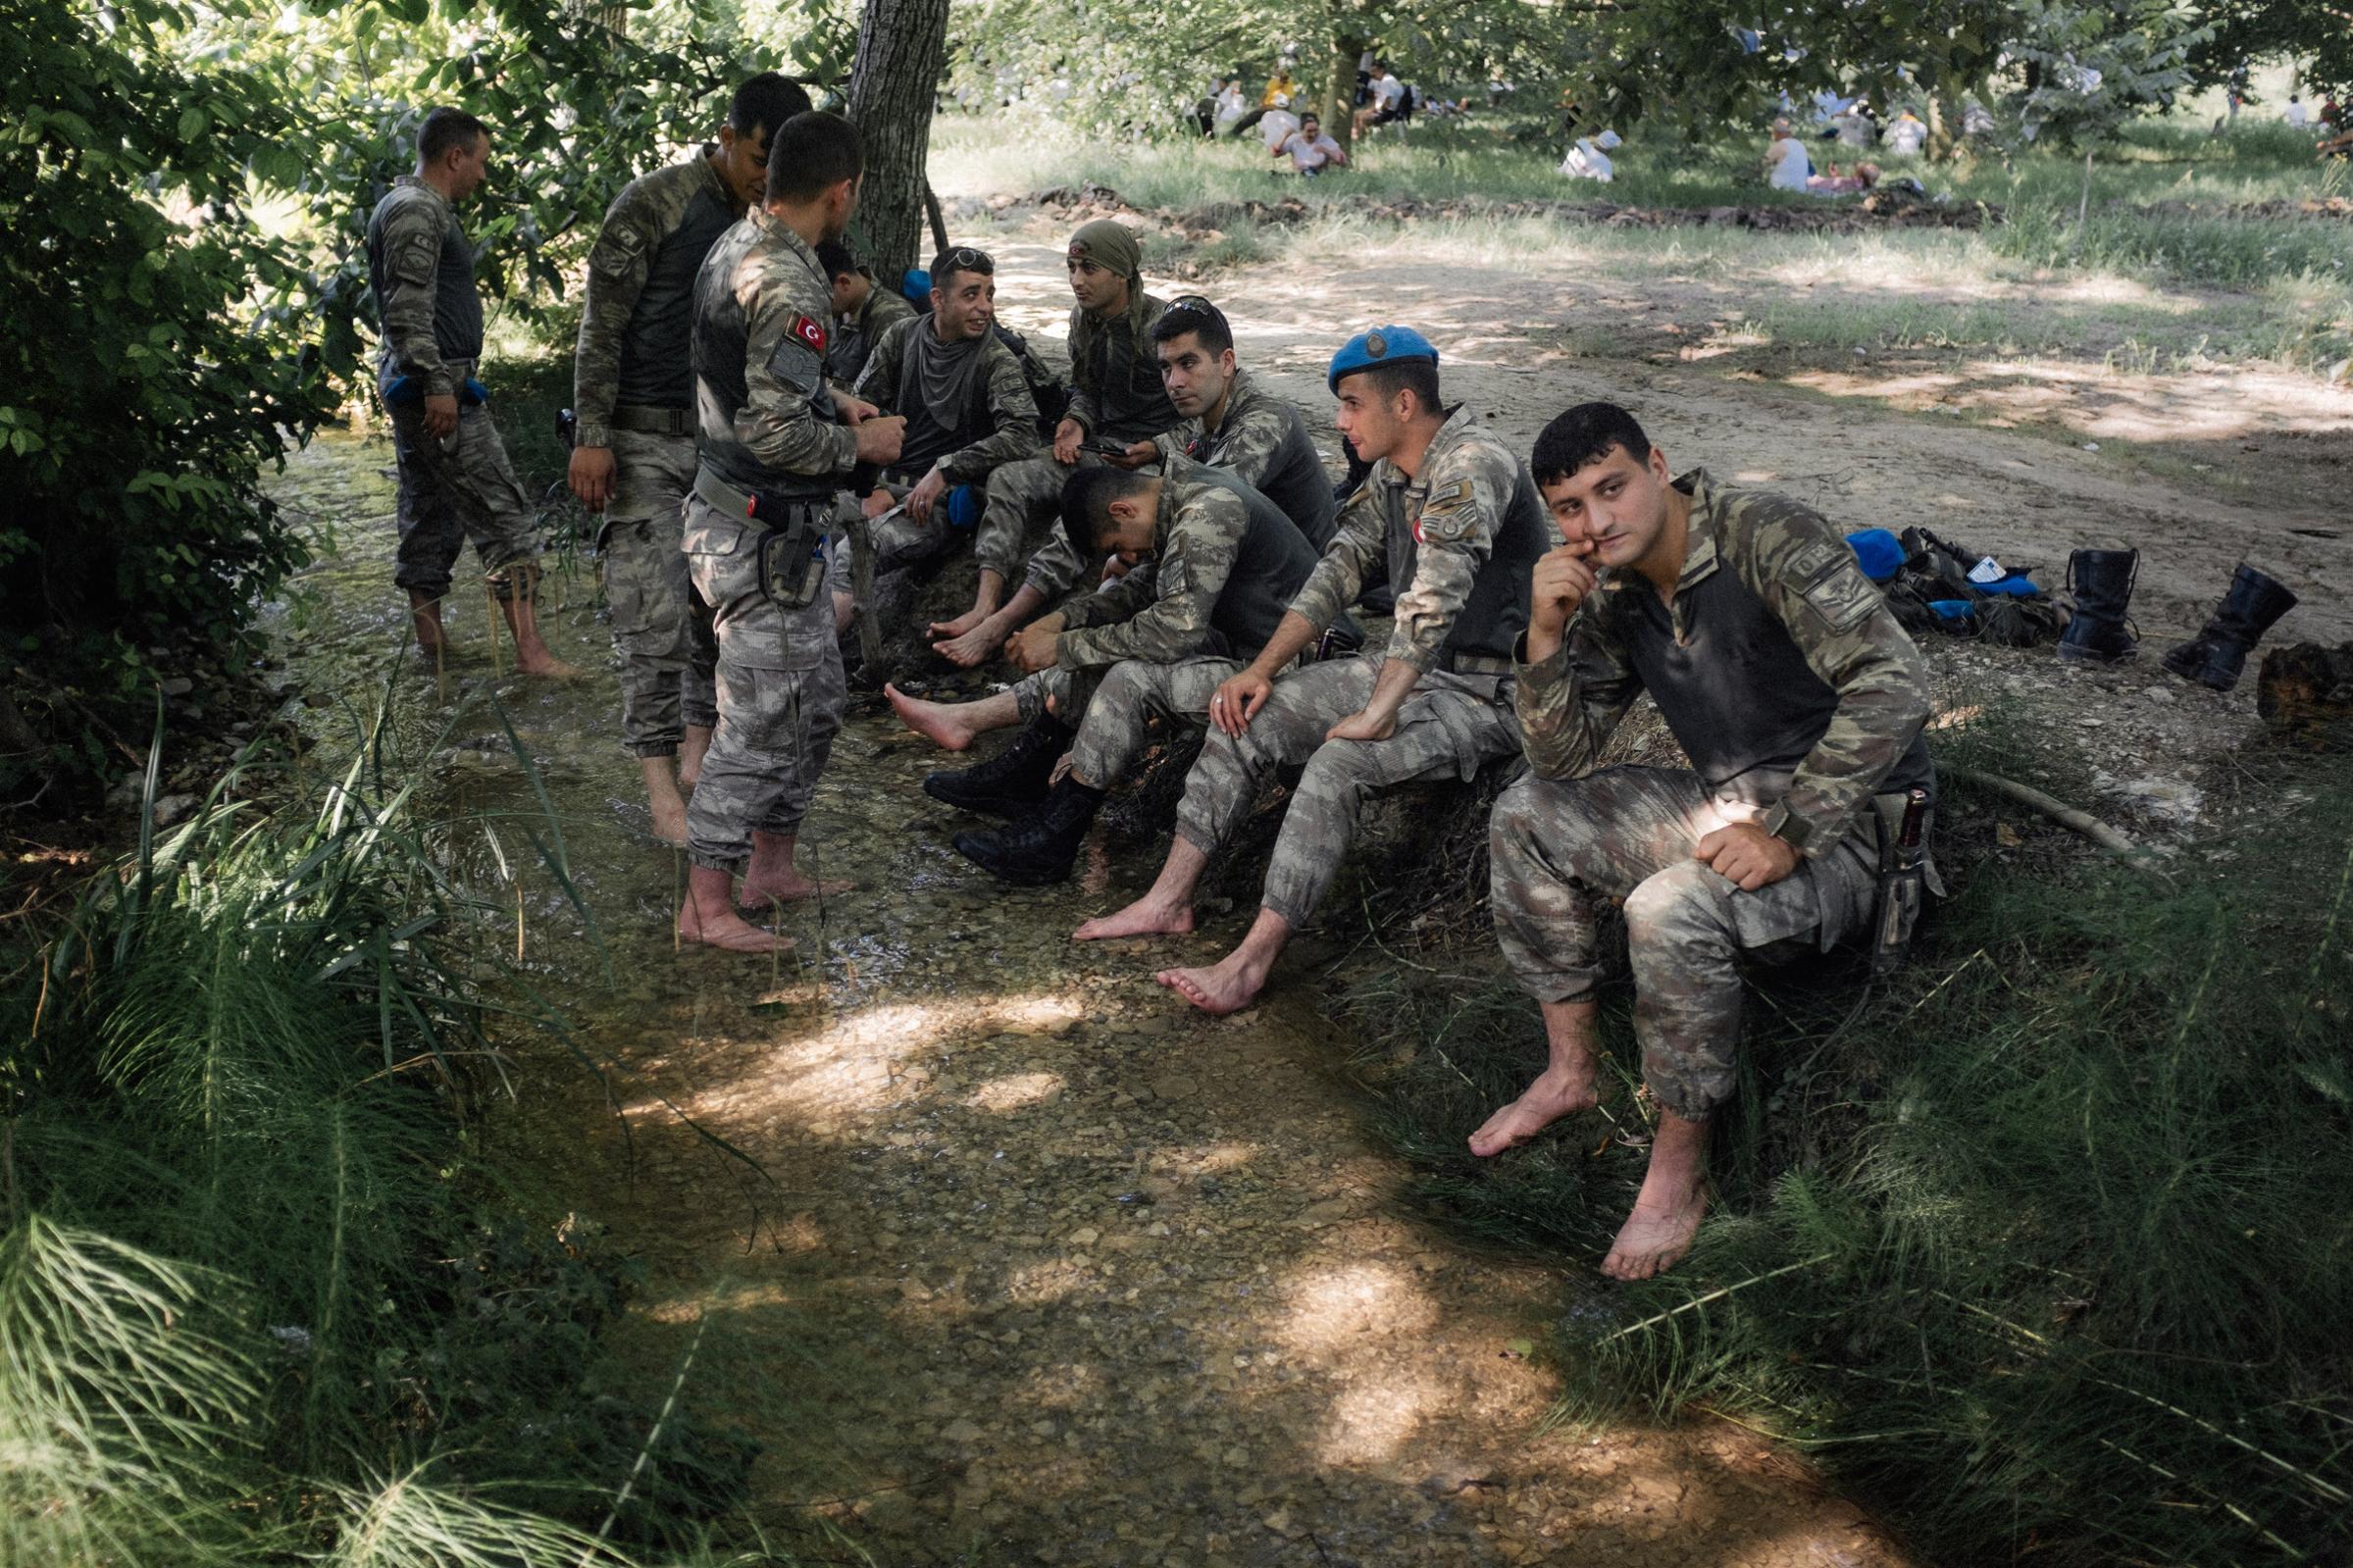 TURKEY, Sakarya. Turkish soldiers rests near stream during the break time at Justice March. More the march approaches Istanbul, more risks of confrontation are high. Erdogan accused Kilicdaroglu of staging “protests to protect terrorists and those who support terrorism”. At a weekend meeting of his ruling AK party, Erdogan said the CHP’s latest stance “had gone beyond being a political opposition and taken on a different proportion".Responding to Erdogan’s accusations, Kilicdaroglu said they were “fitting for a dictator”.2017